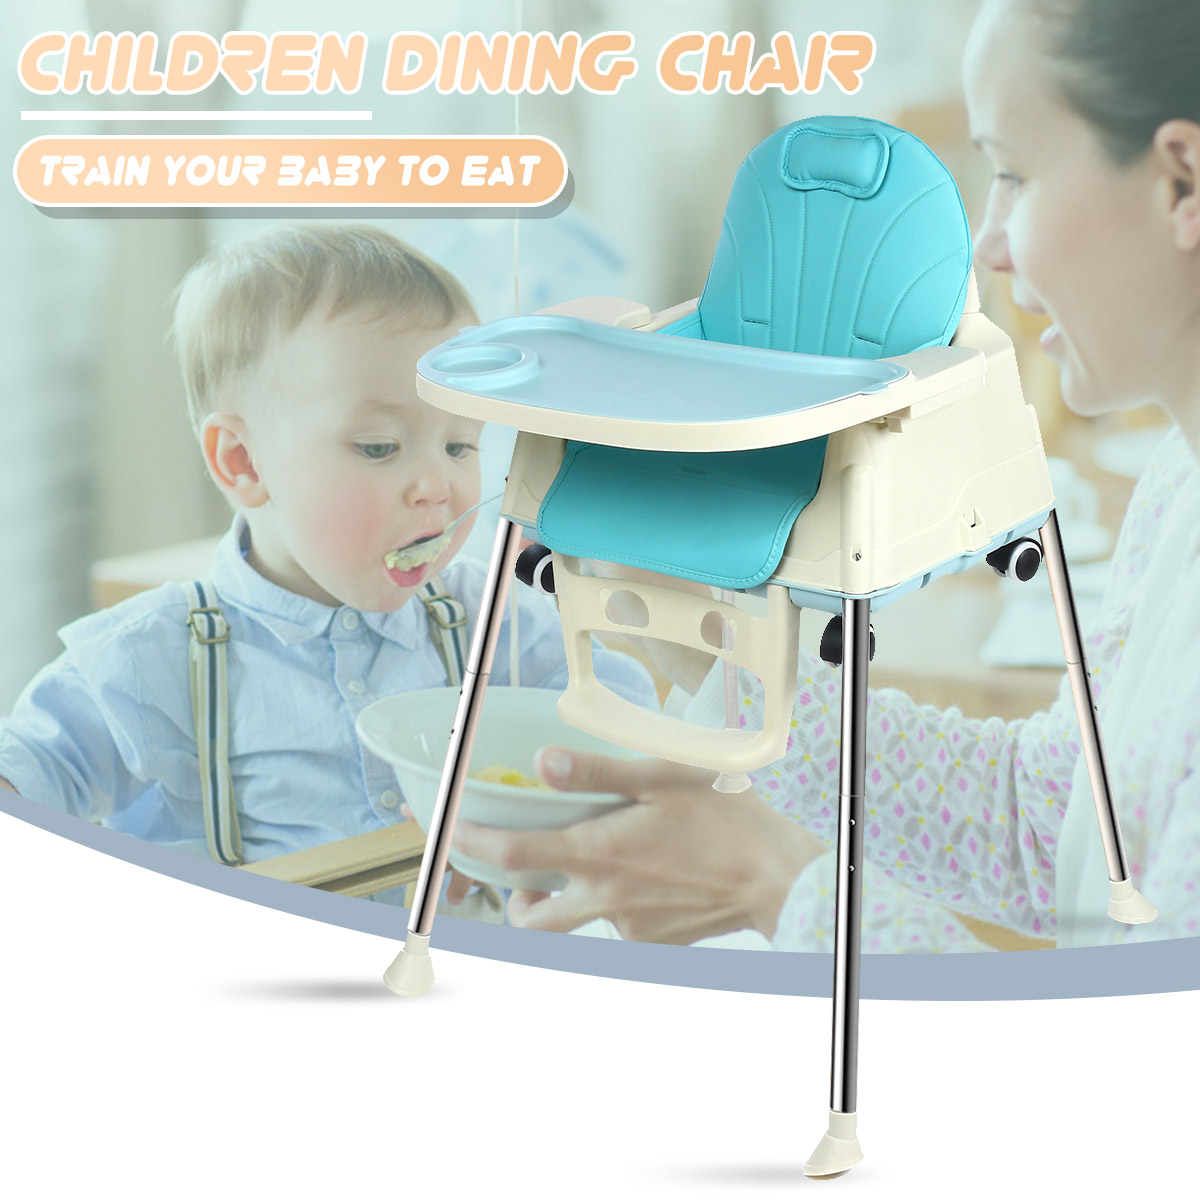 Childrens-Dining-Chair-Baby-Eating-Table-BB-Plastic-Multifunctional-Dining-Chair-Men-and-Women-Baby--1951925-16